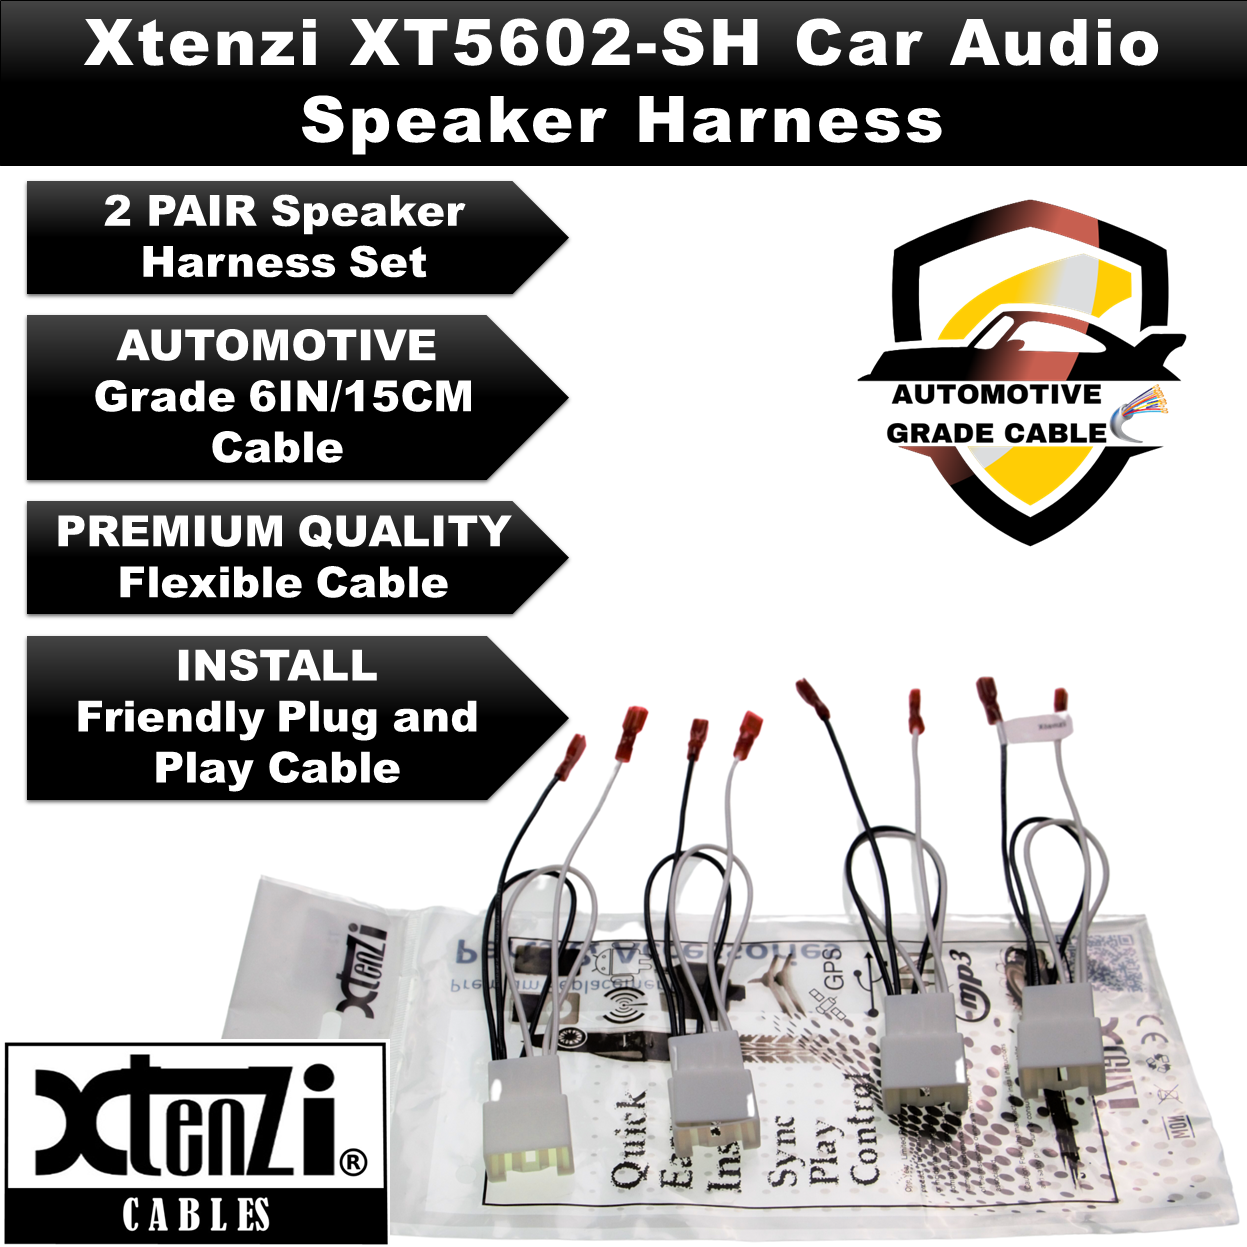 Xtenzi 2 Pair Car Audio Speaker Harness Set for Select Ford and Mazda Vehicles